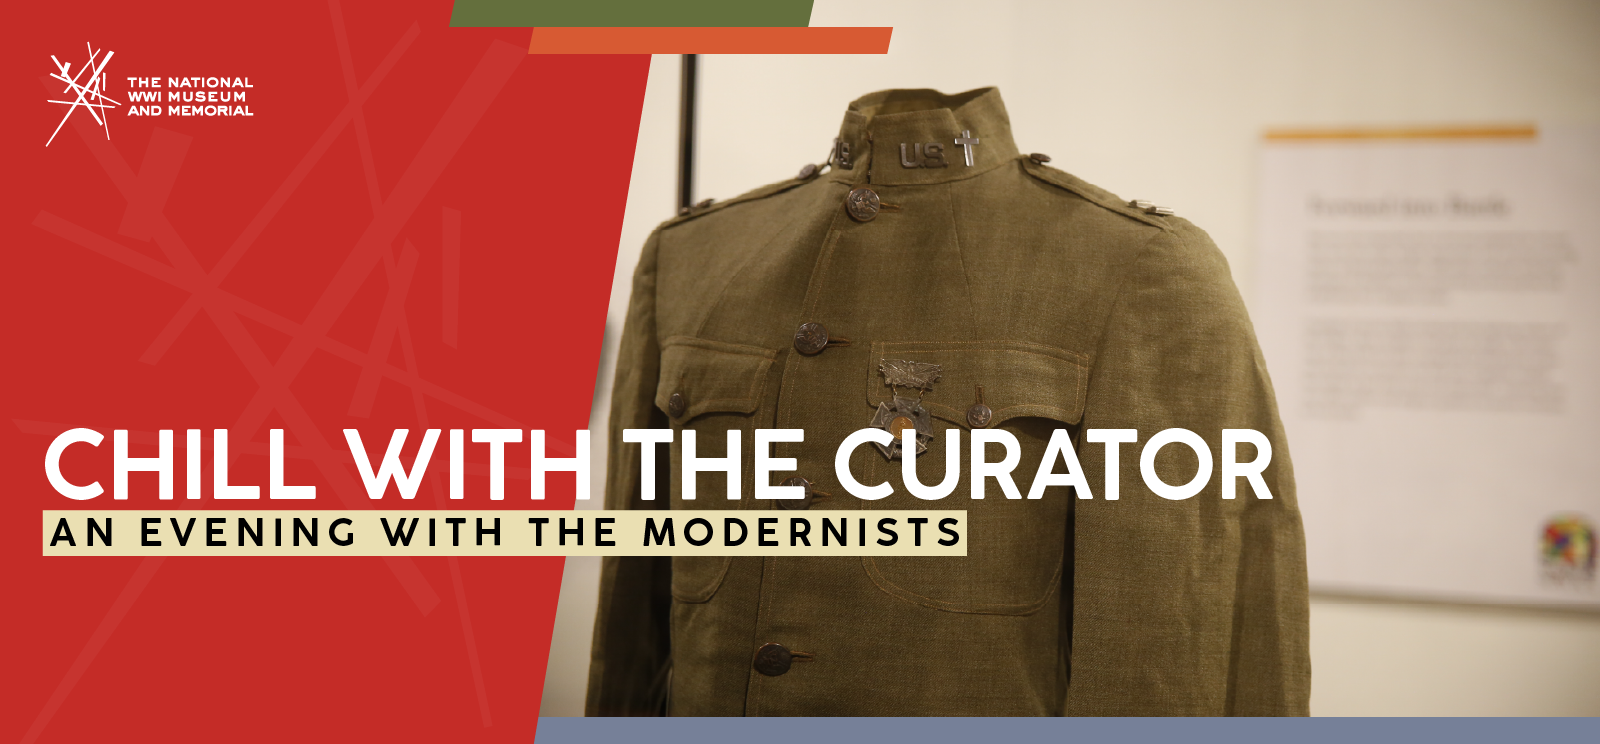 Image: Modern photograph of a WWI-era military uniform jacket with a Christian military chaplain insignia pin on the collar. Text: 'Chill with the Curator / An Evening with The Modernists'